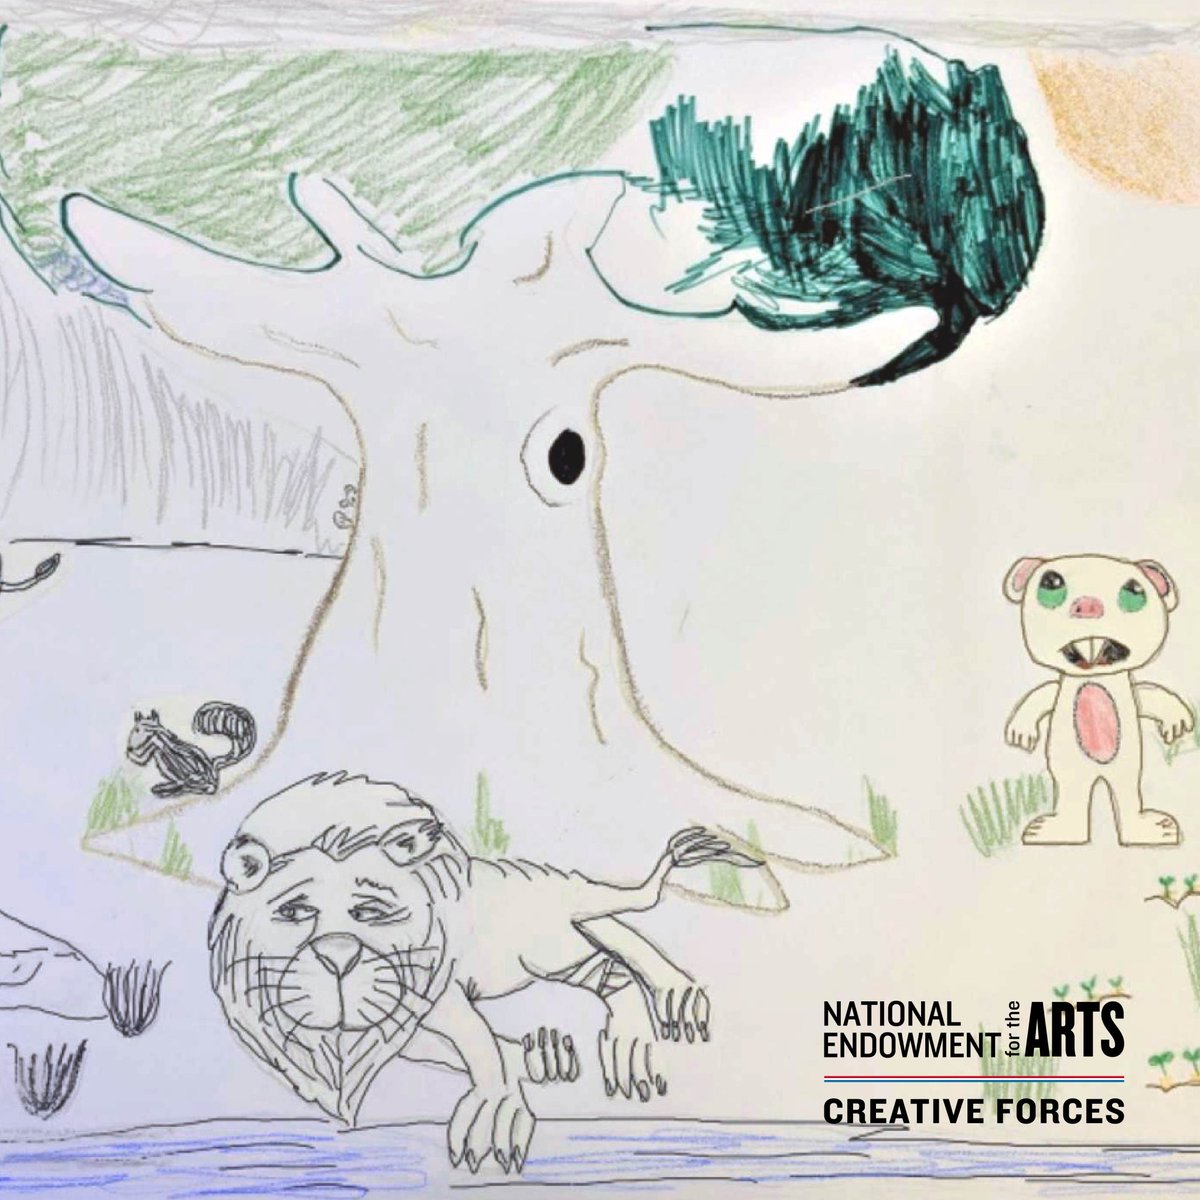 Creative Forces research describes how deployments, injuries, and stressors impact military families. Through #ArtTherapy, these families can find new ways to communicate with one another. Learn about the healing power of art therapy: doi.org/10.1016/j.aip.… #MilFam #ArtsInHealth